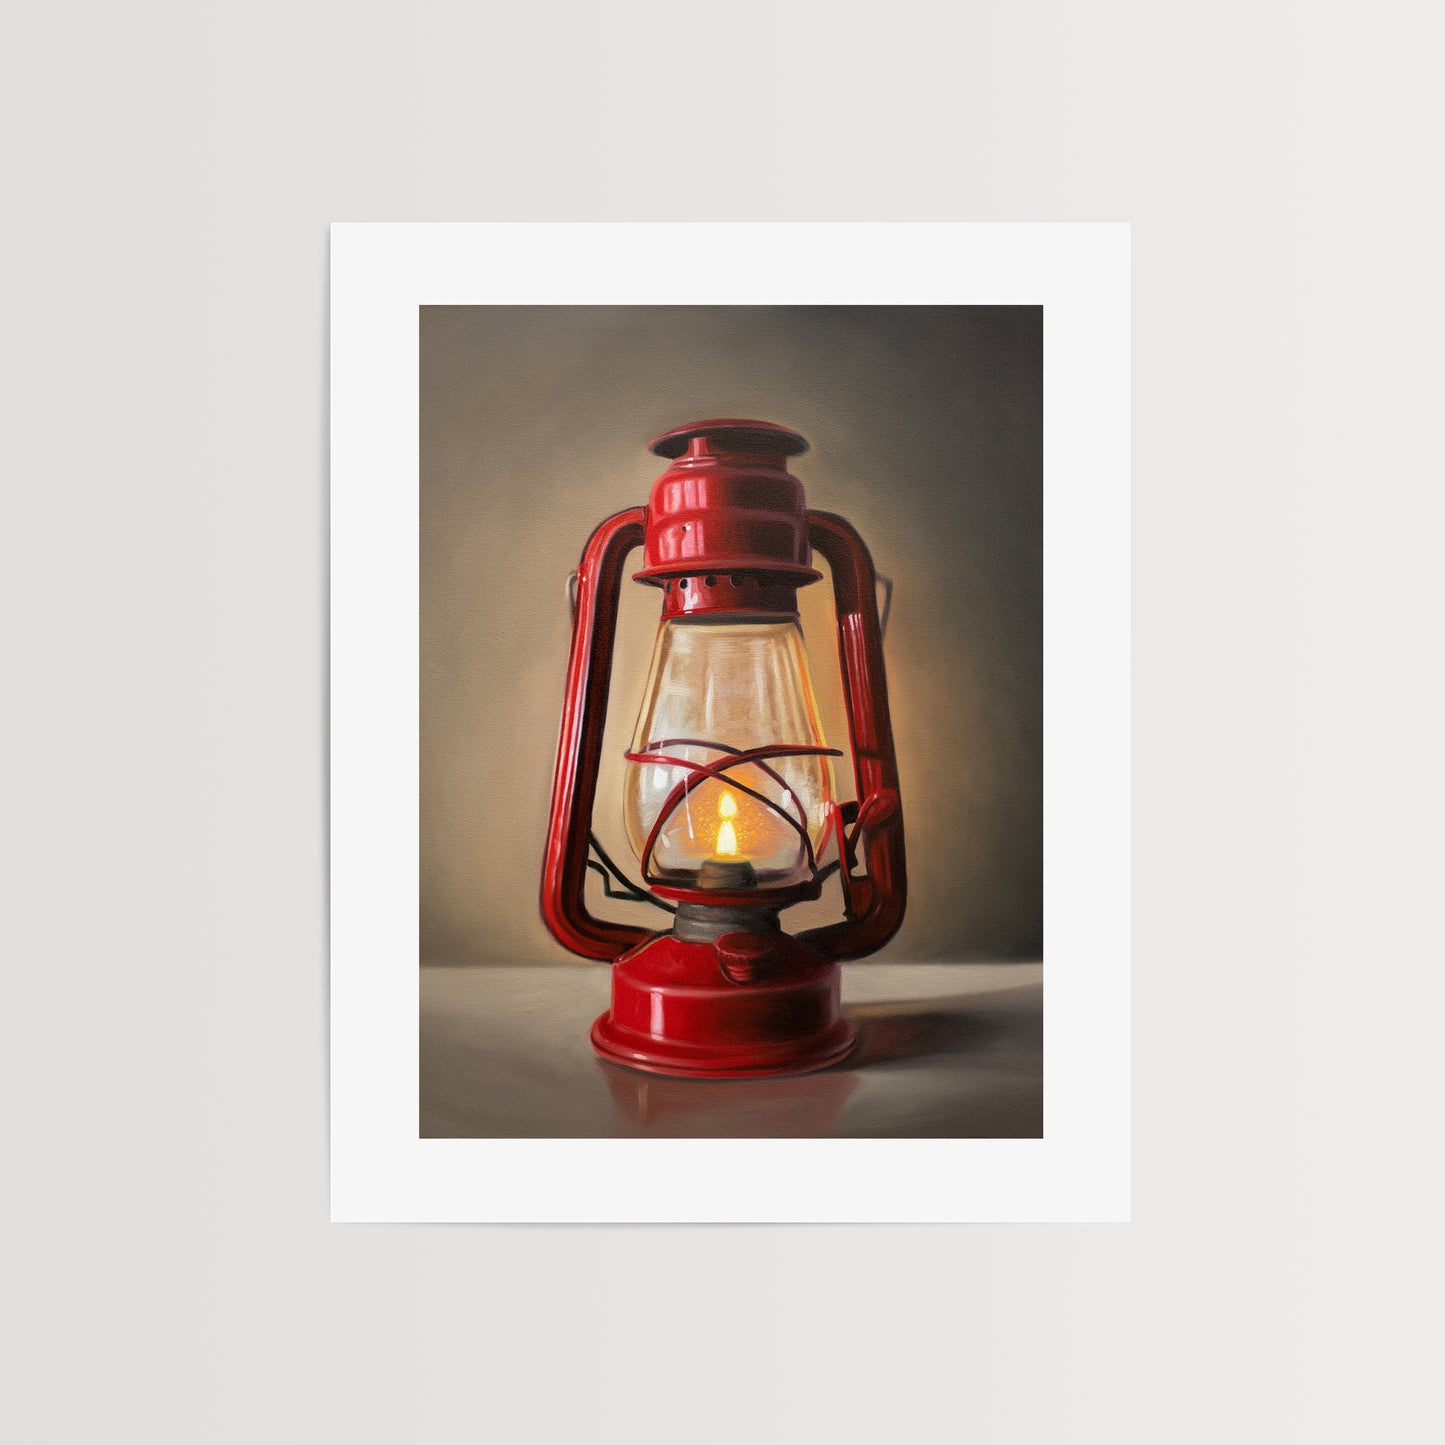 This artwork features a vintage red lantern illuminating the wall behind with its flame.